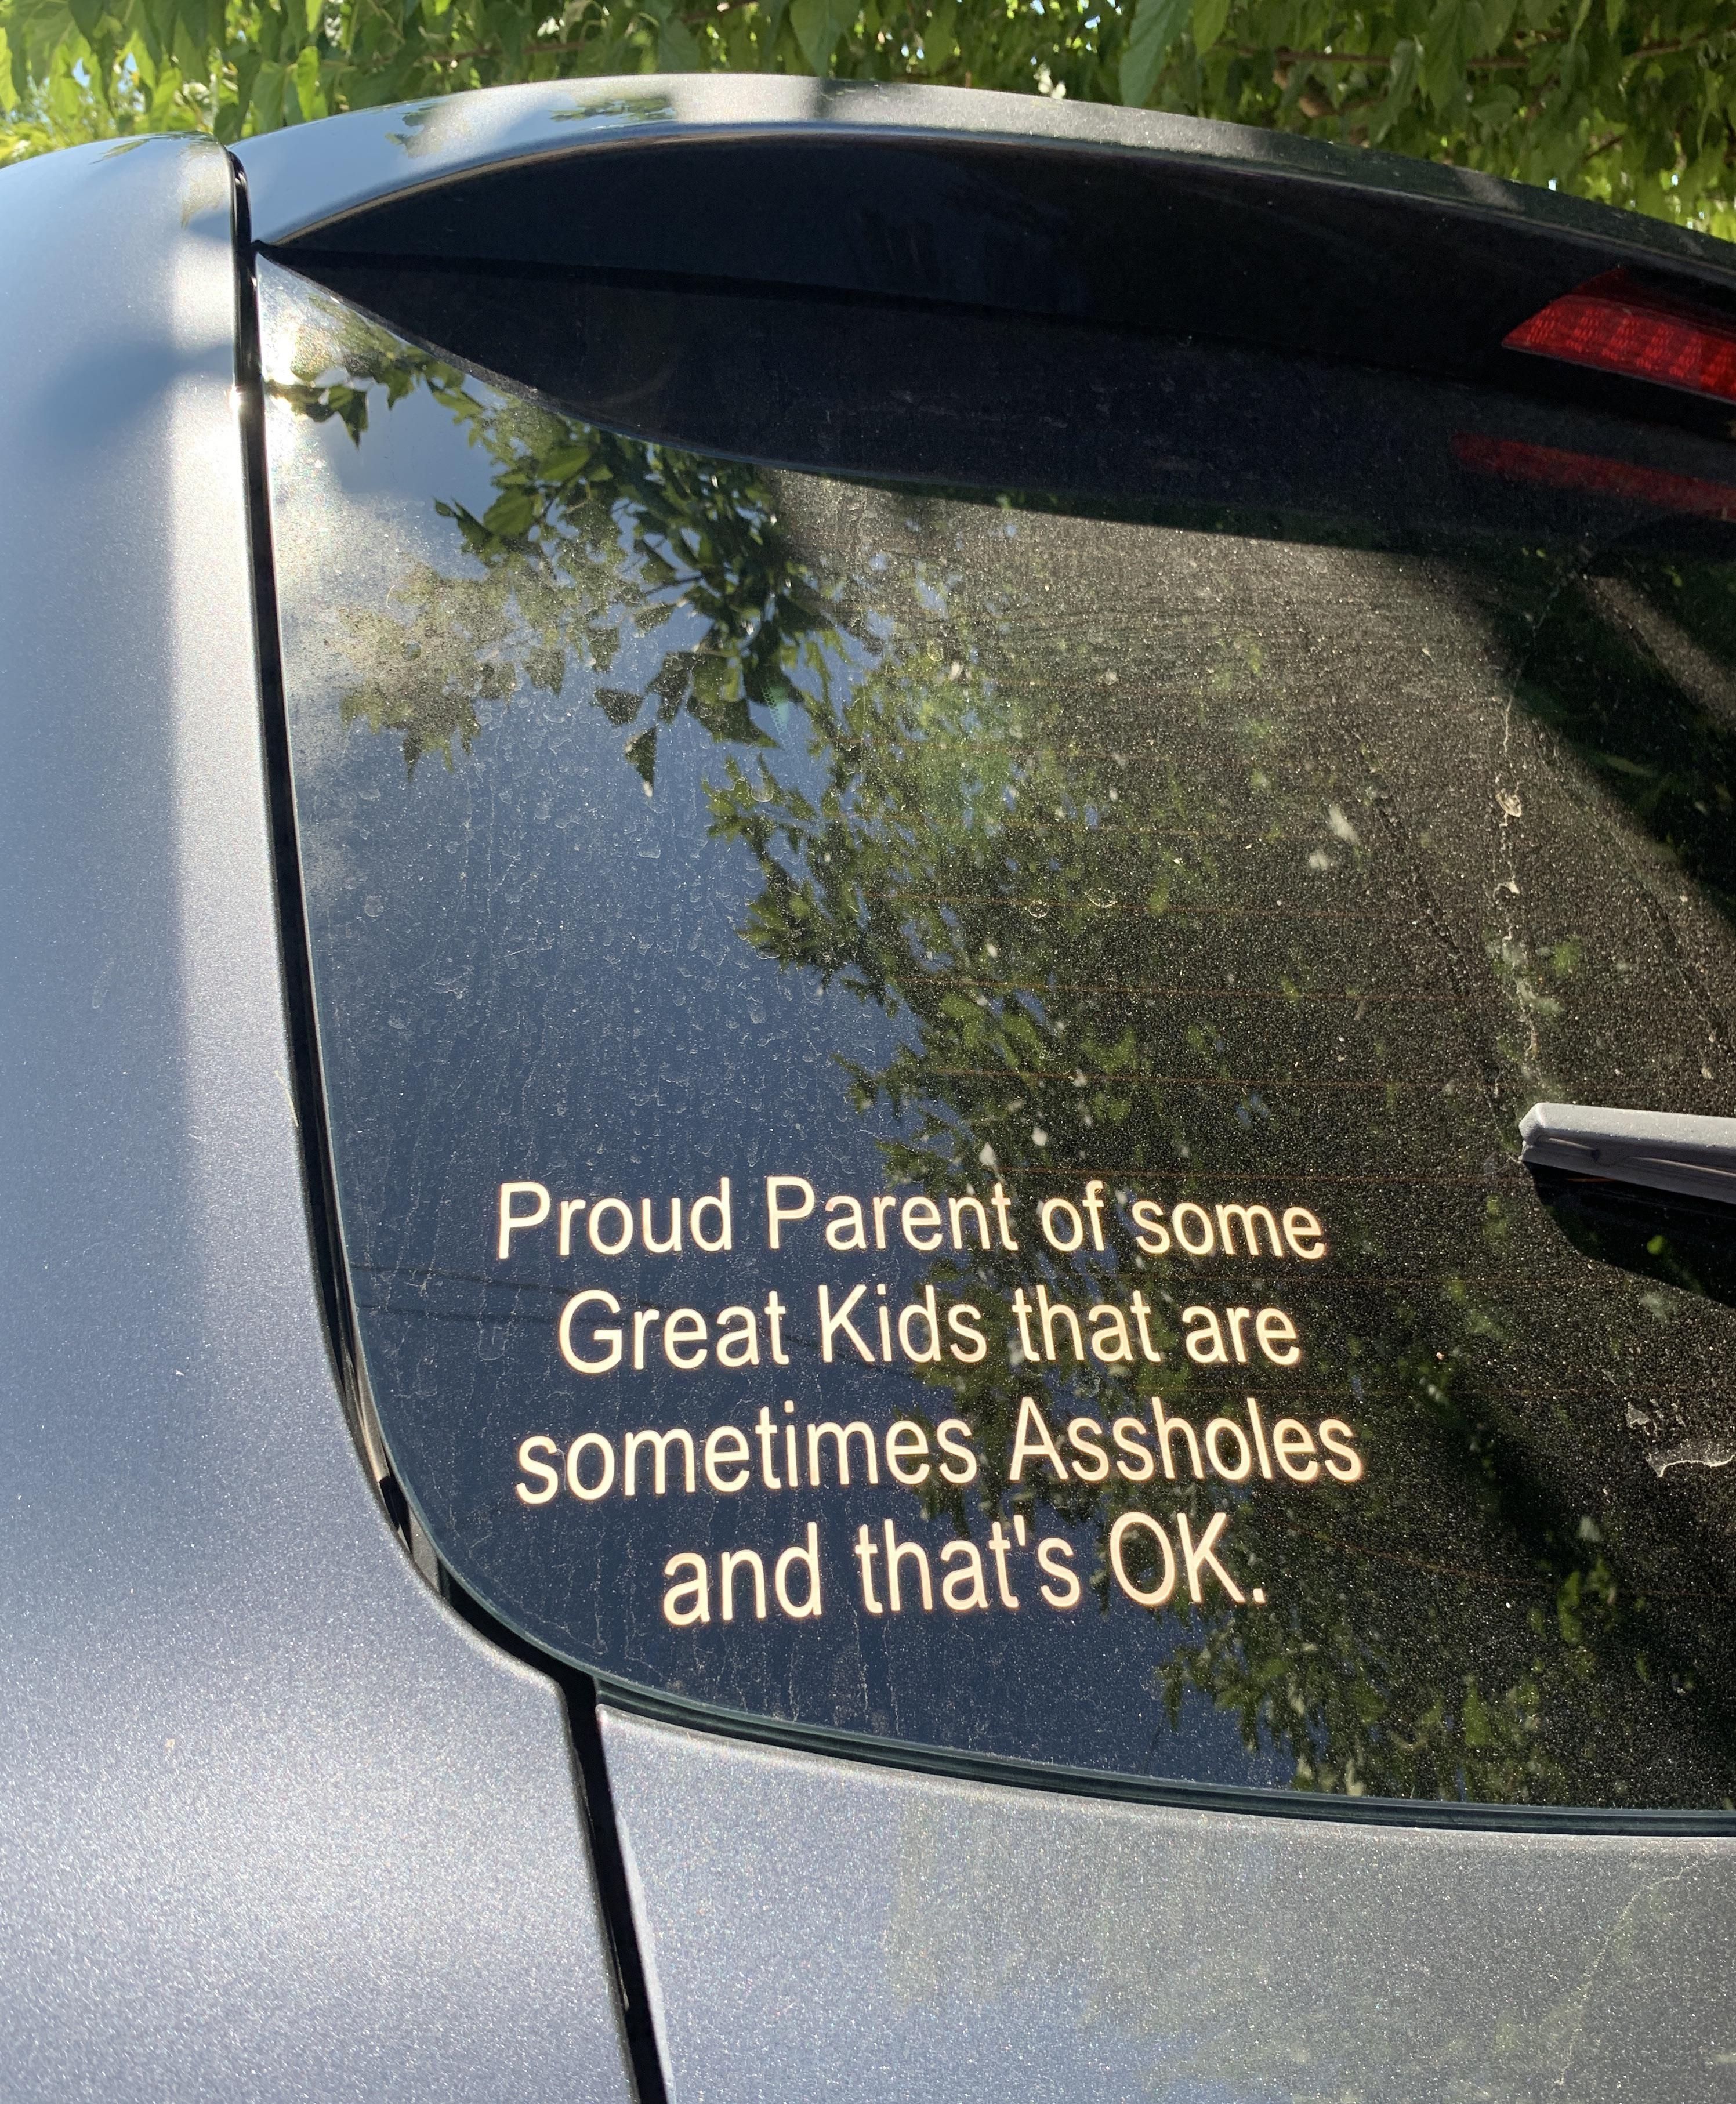 Dropped the kids off for their first day of school and spotted this on another parent’s car.